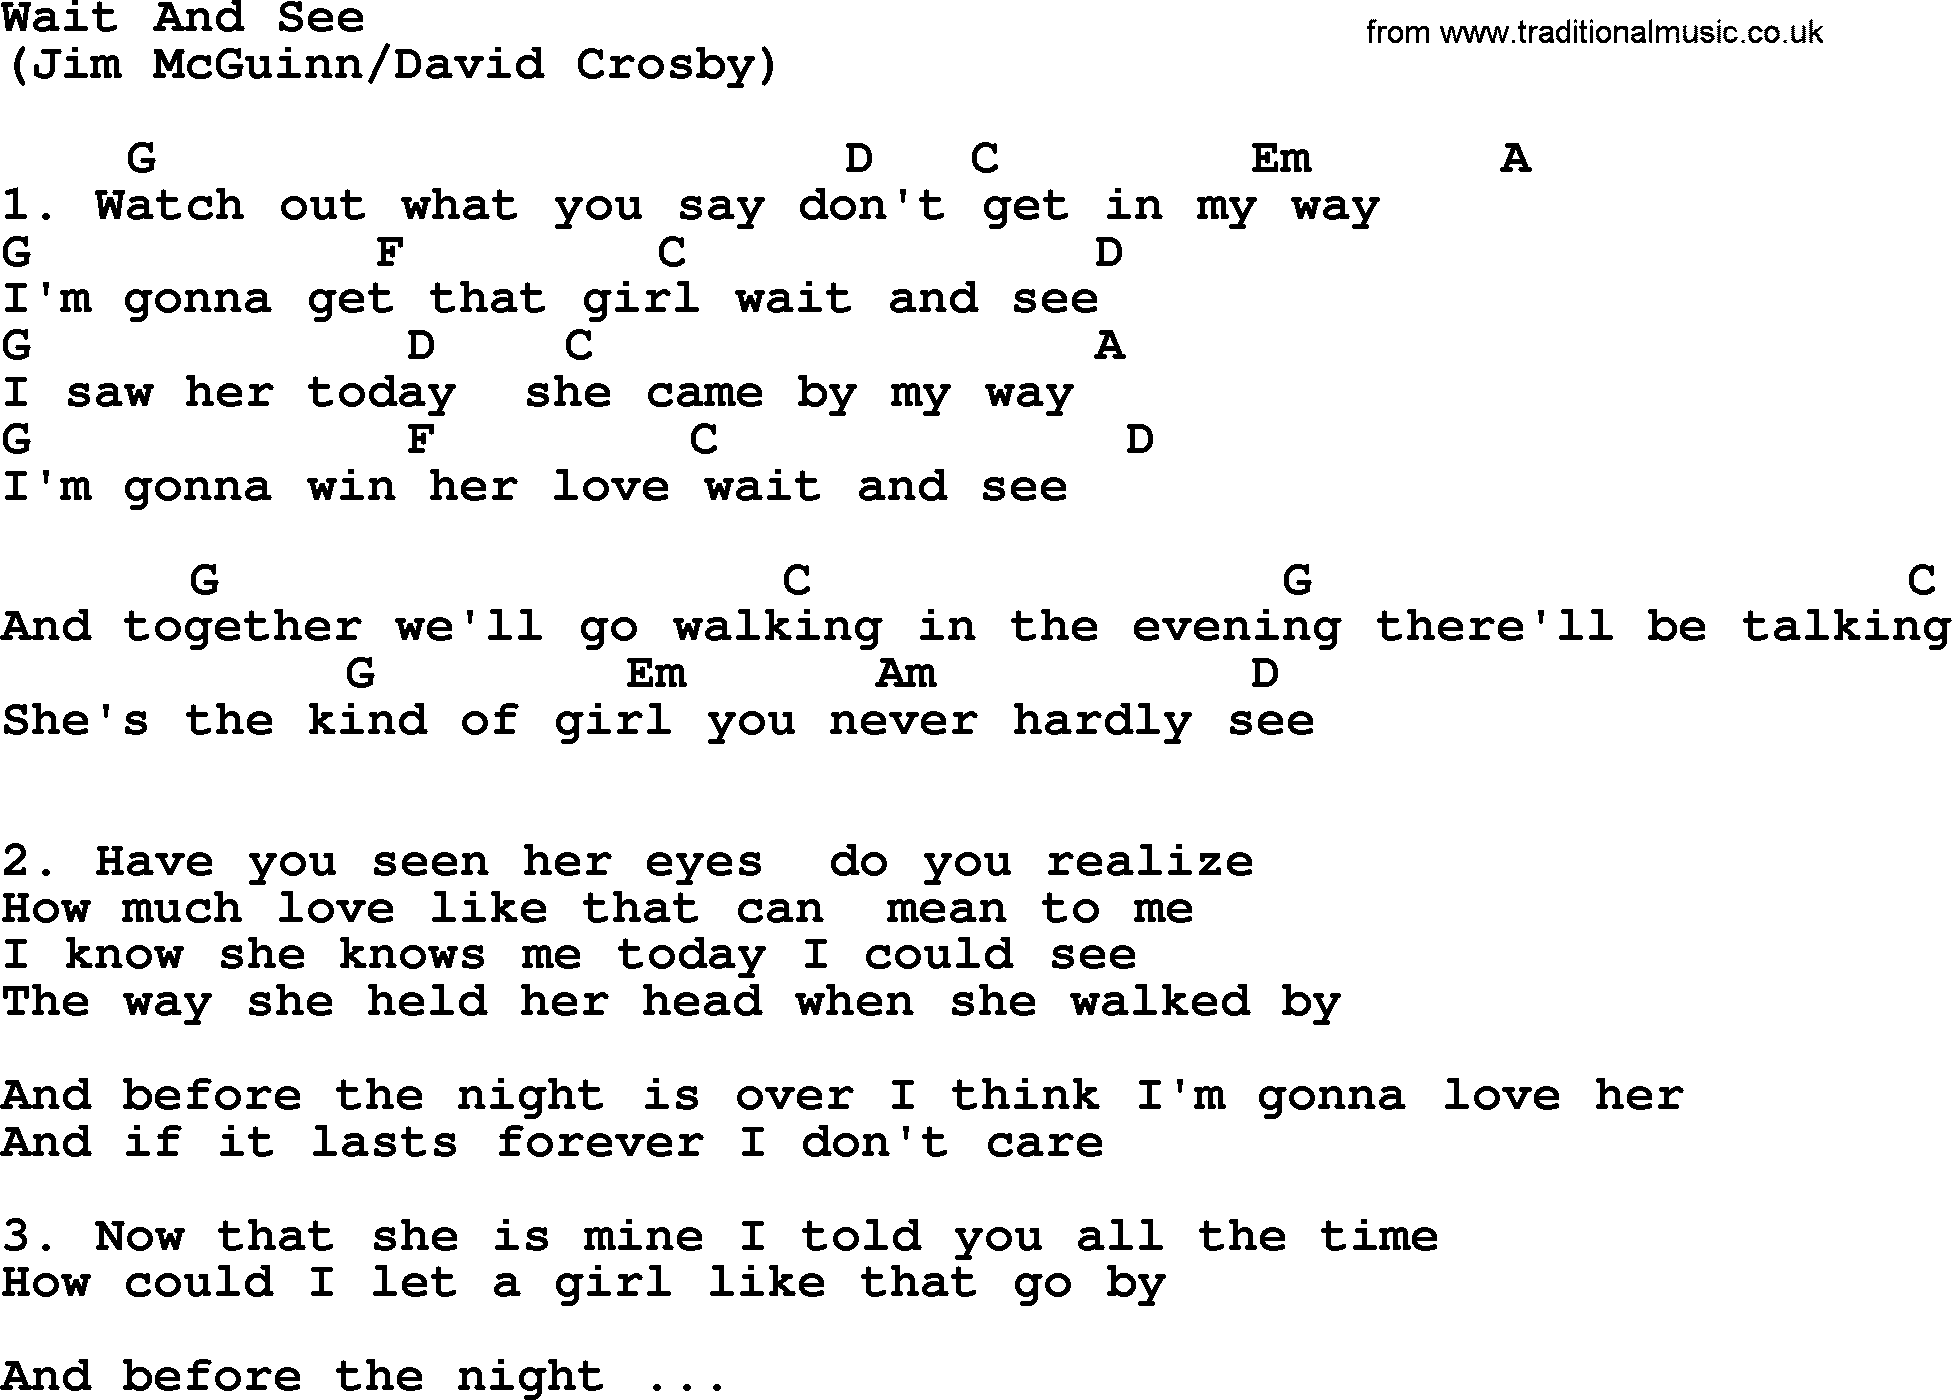 The Byrds song Wait And See, lyrics and chords